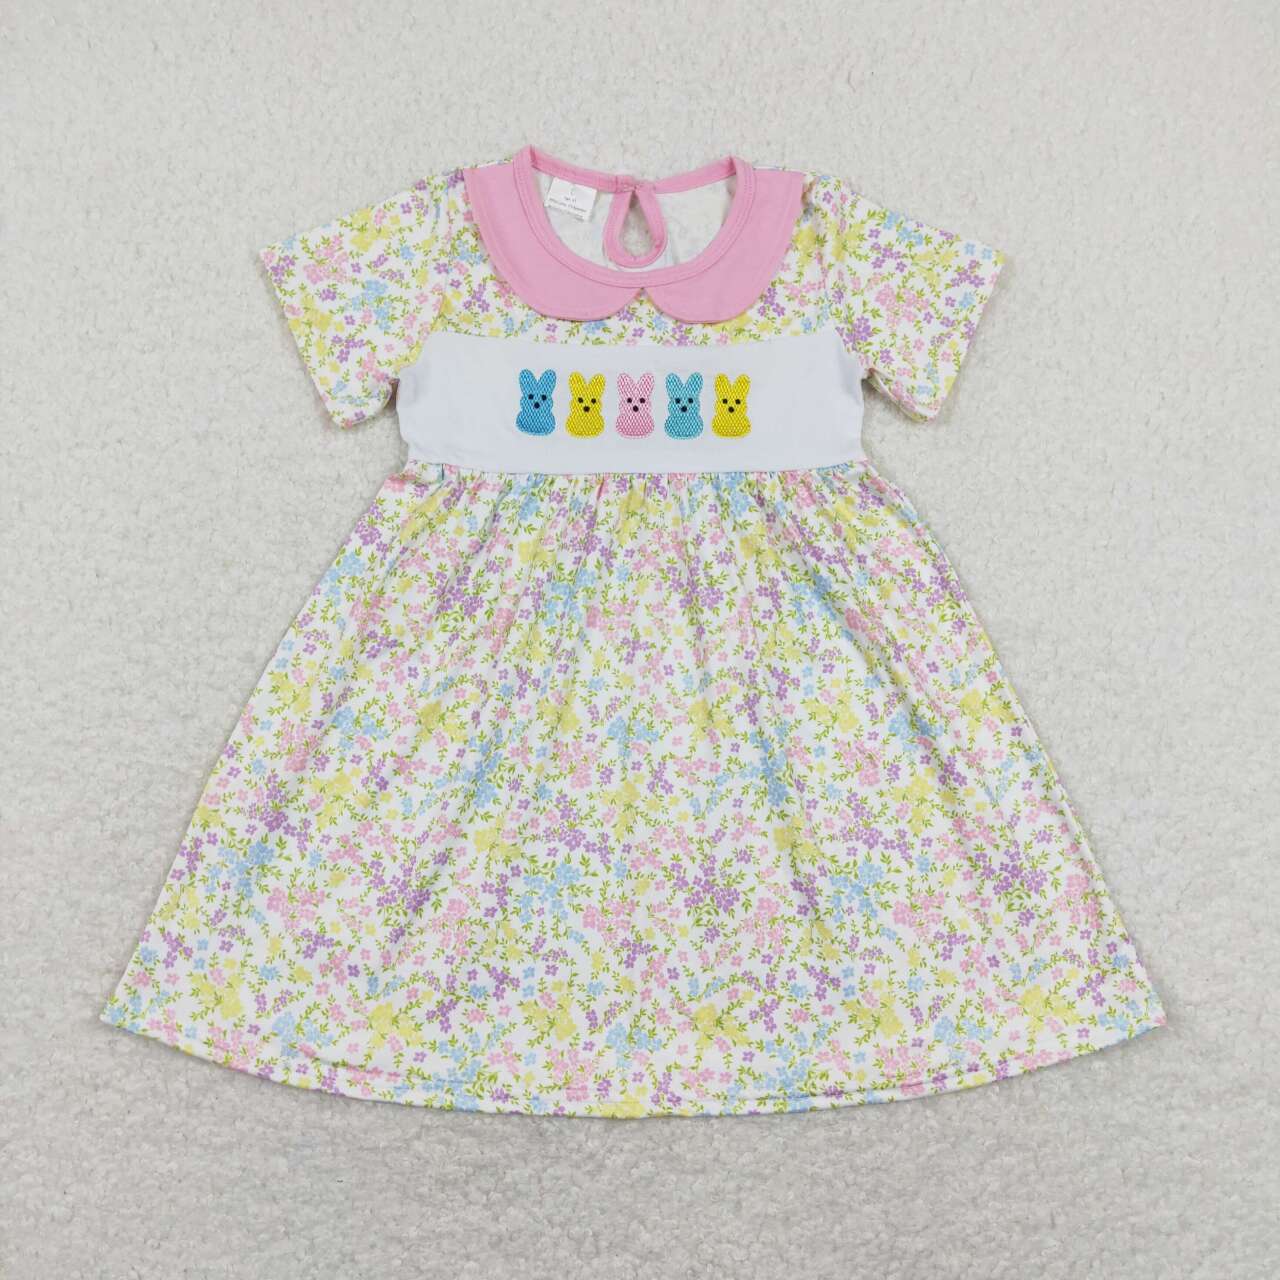 GSD0649 baby girl clothes bunny rabbit embroidery toddler easter dresses baby easter clothes